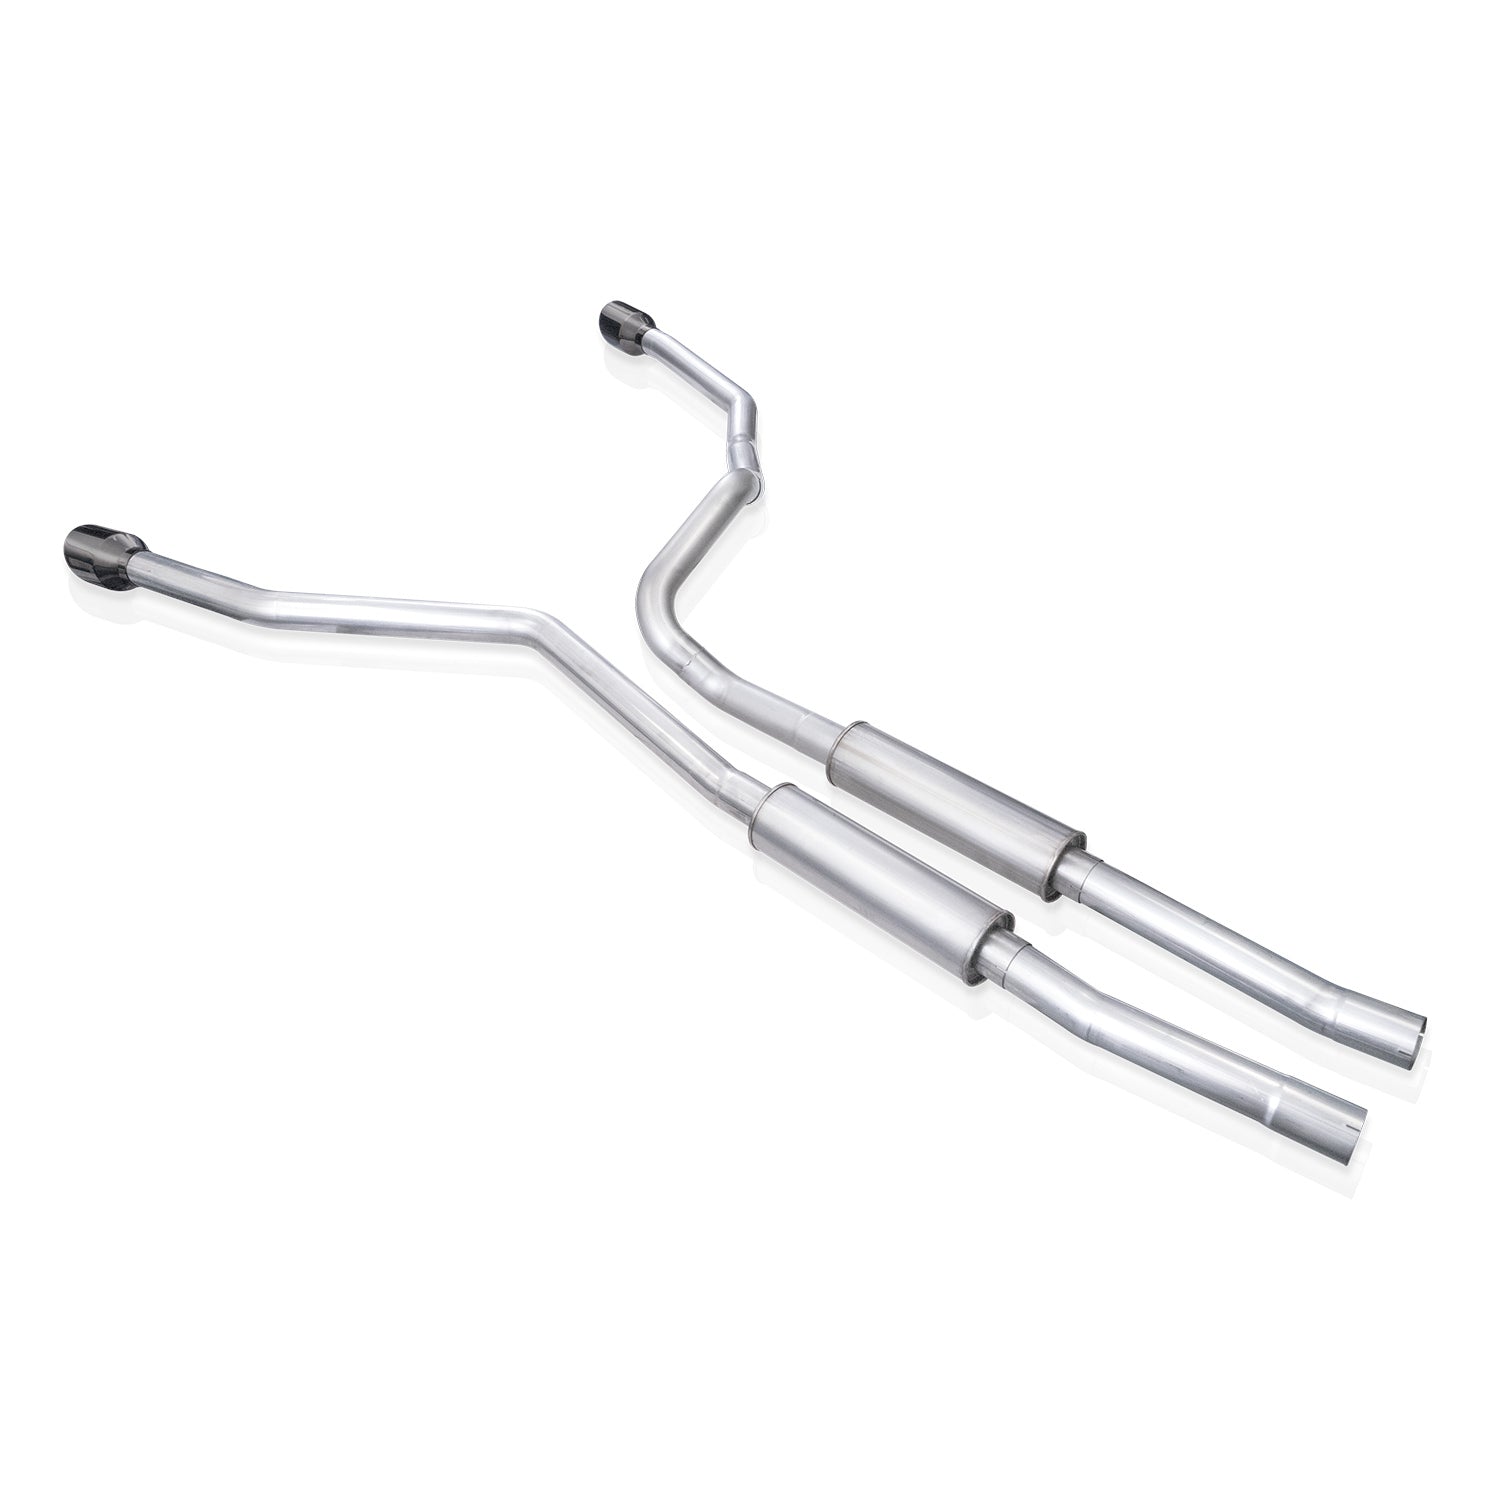 '21-23 Ram TRX 6.2L Catback Exhaust System Stainless Works individual display